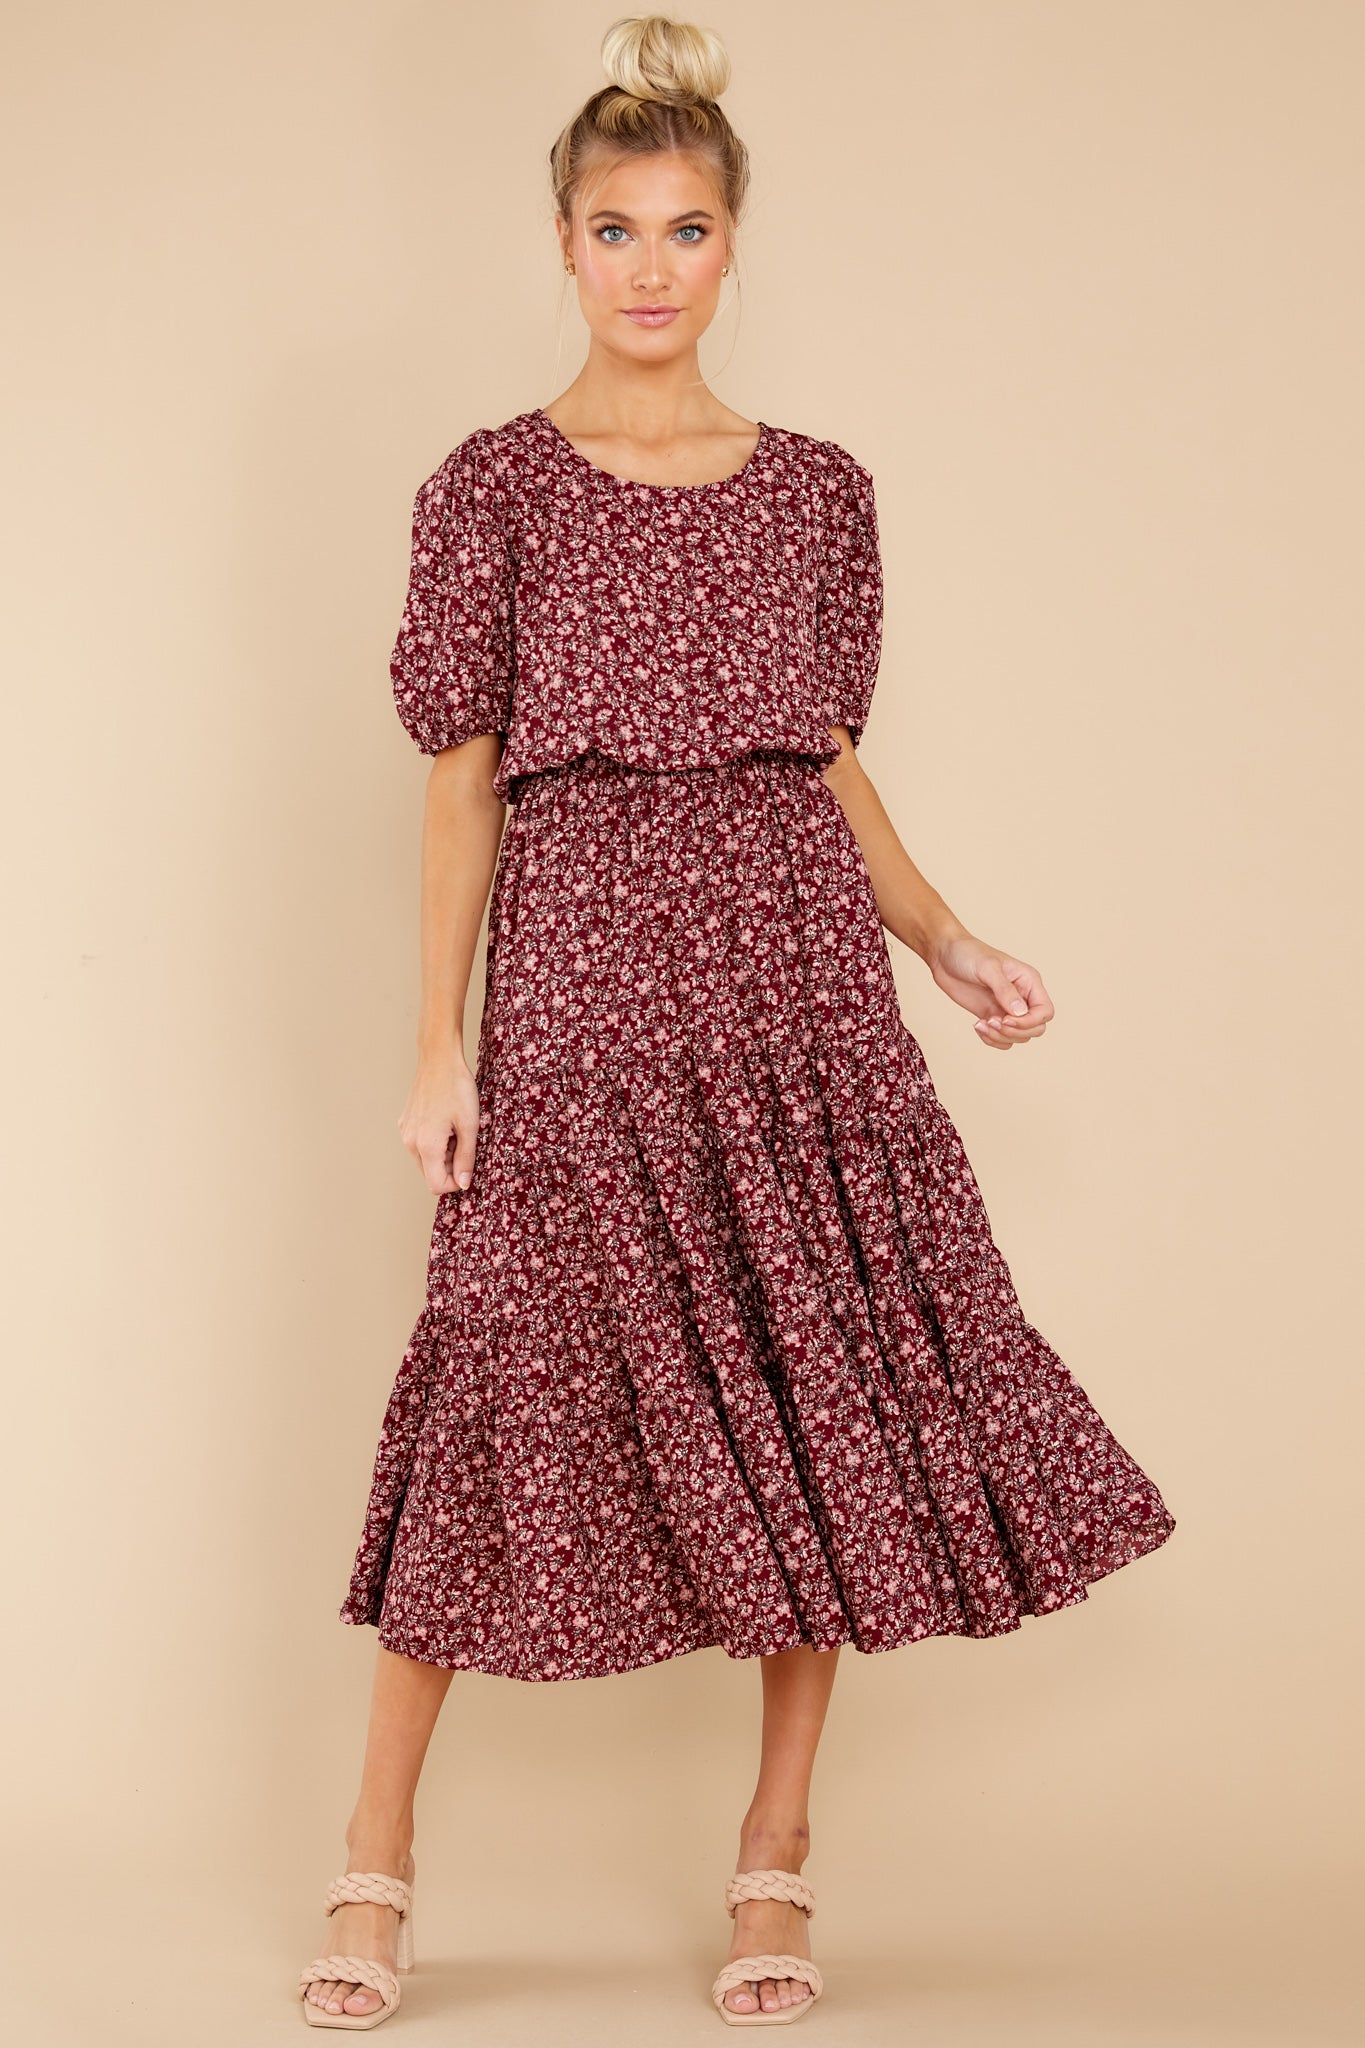 2 Most Certainly Yes Burgundy Floral Print Maxi Dress at reddress.com